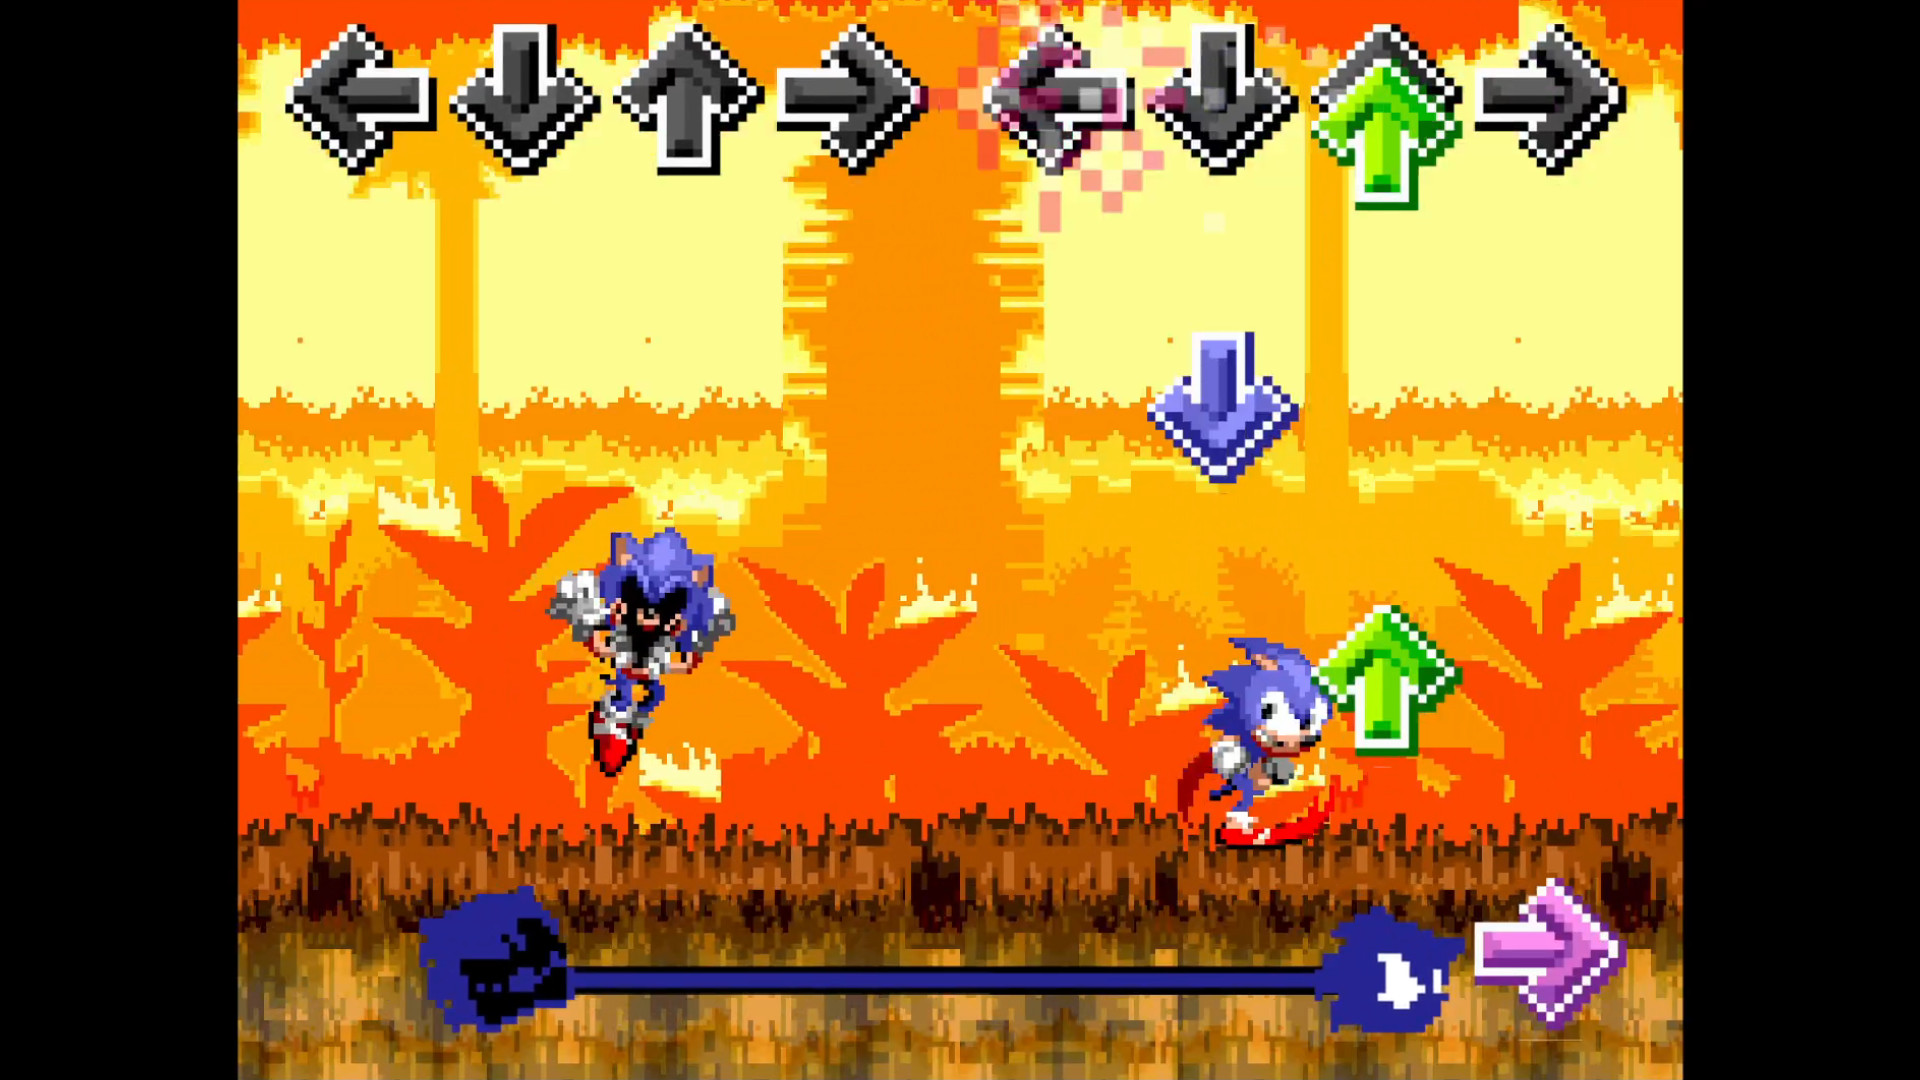 Confronting yourself fnf sonic. Sonic exe confronting yourself Final Zone download game v2.